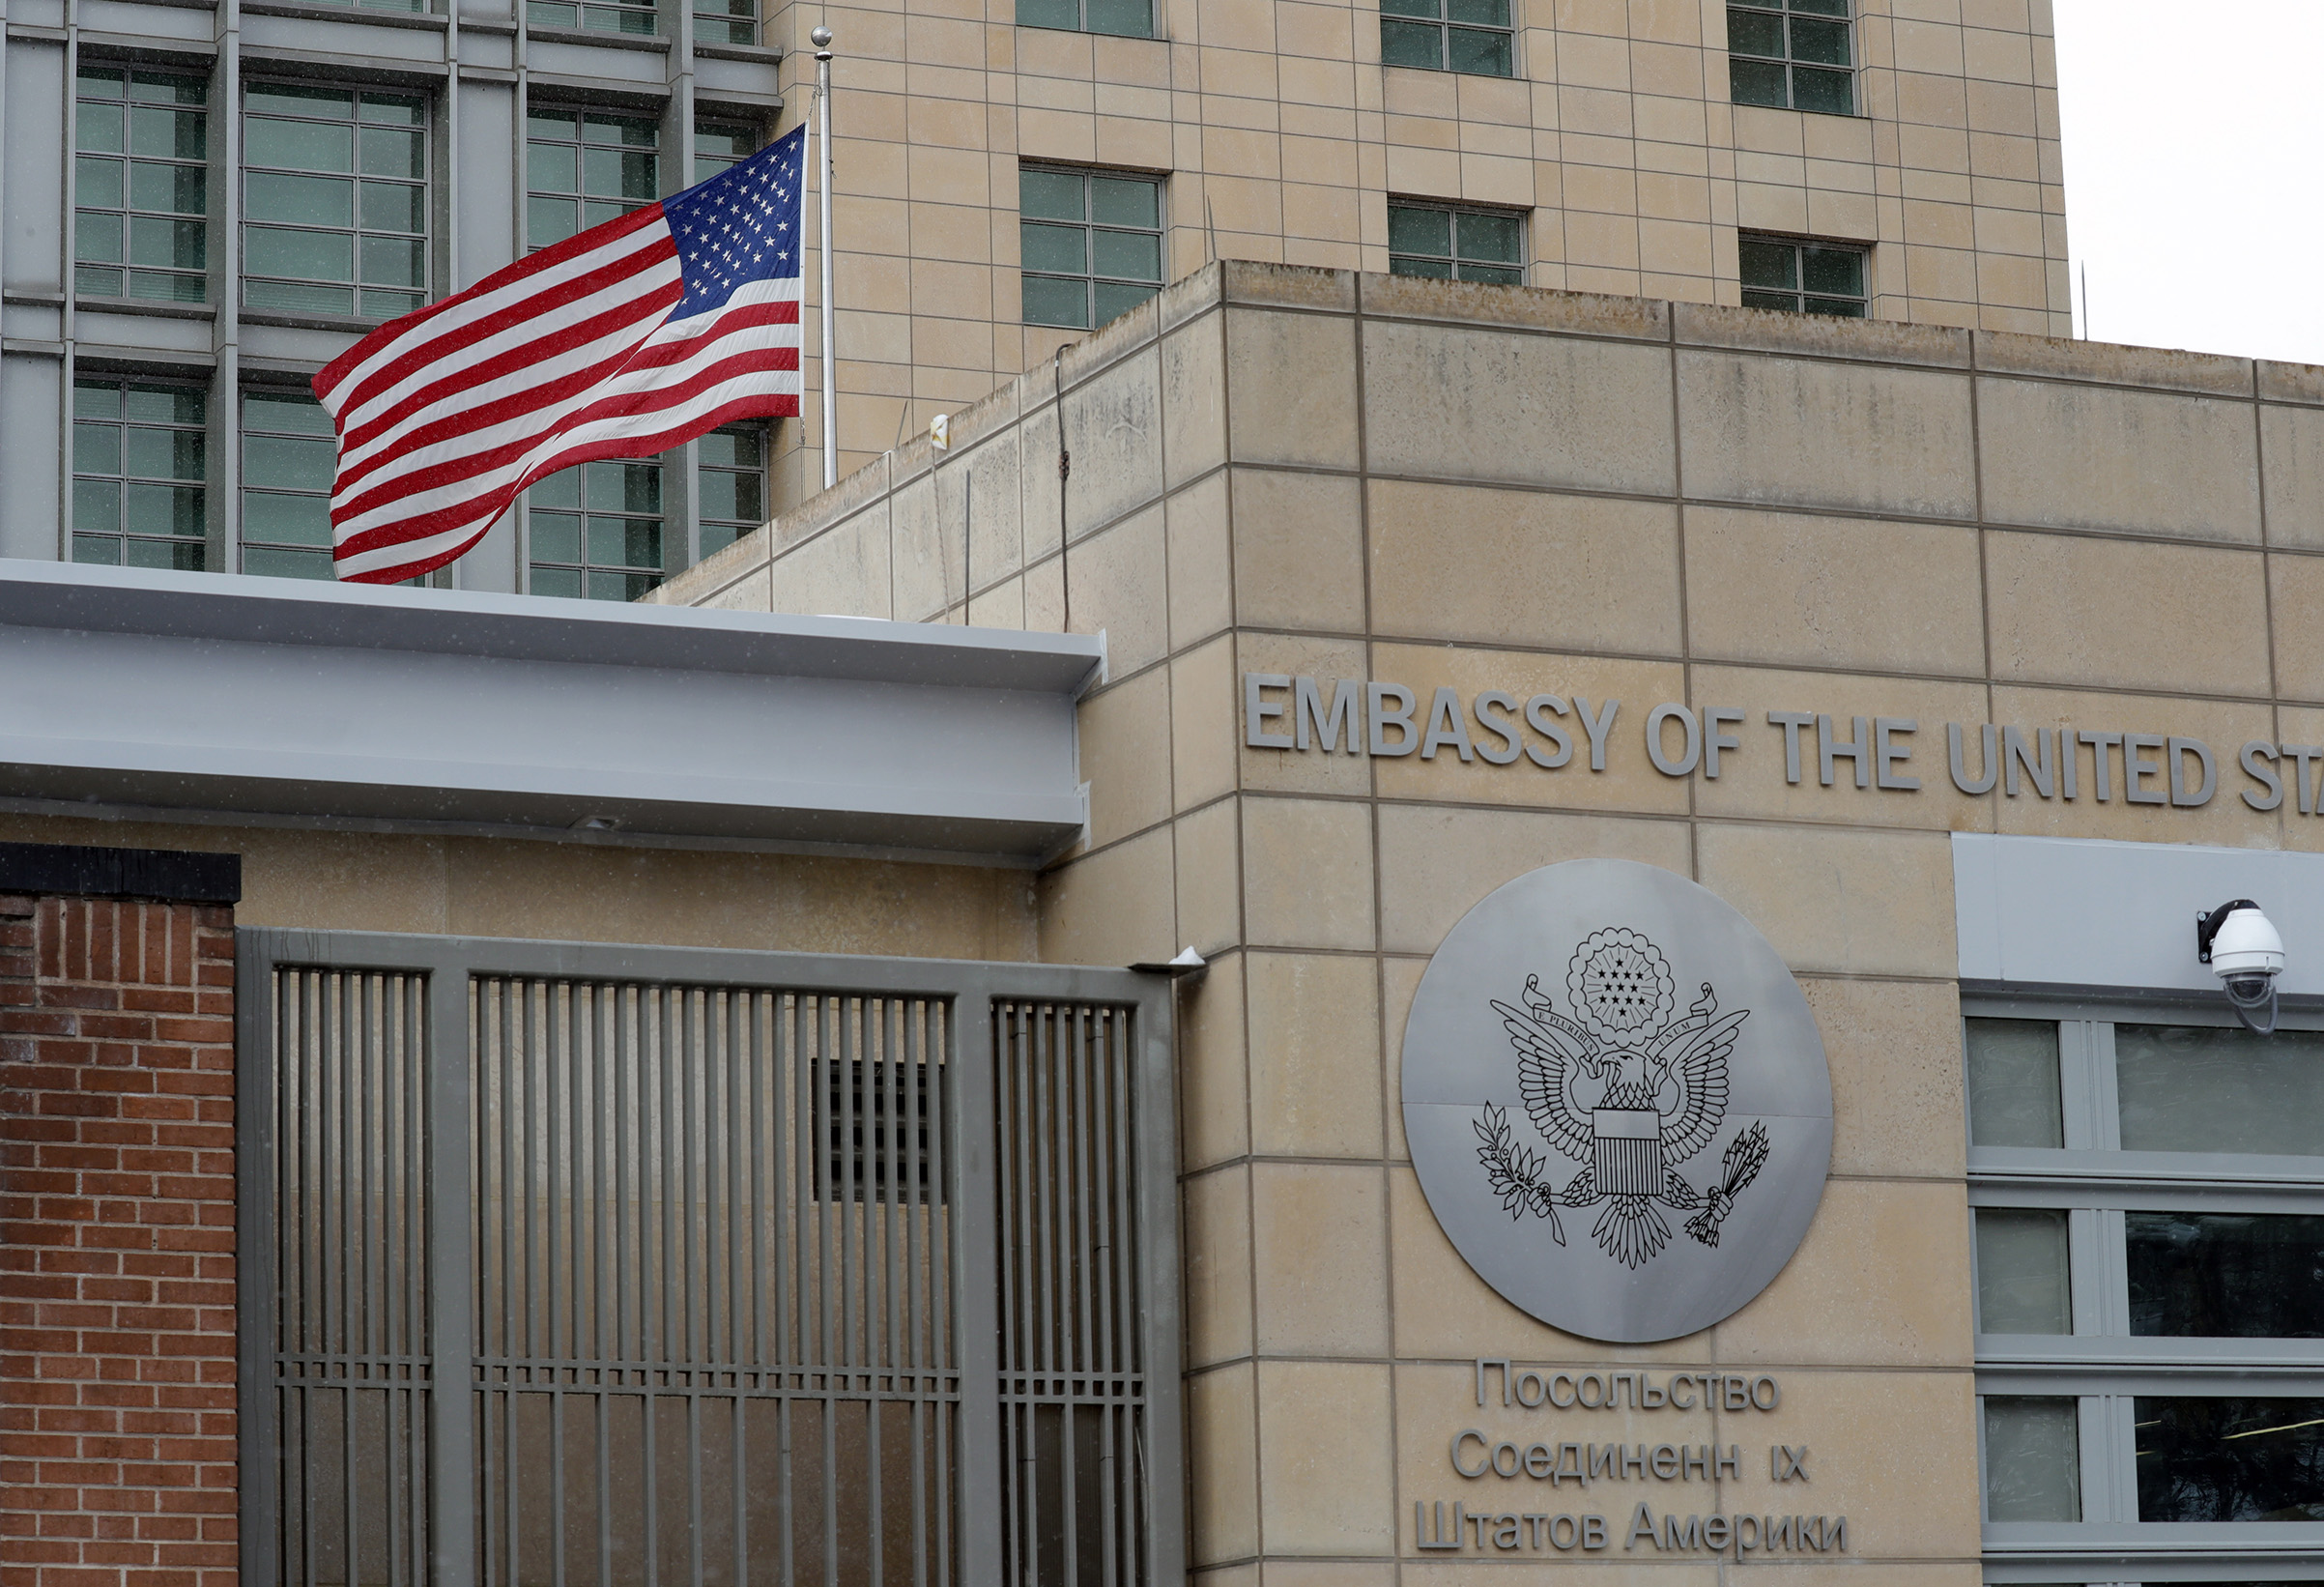 US national flag waving by the Embassy of the United States of America. The USA has decided to expel 60 Russian diplomats and close the Consulate General of the Russian Federation in Seattle over the poisoning of former Russian military intelligence officer Sergei Skripal and his daughter Yulia in Salisbury, Britain on 4 March 2018 (Mikhail Japaridze—TASS/Getty Images)